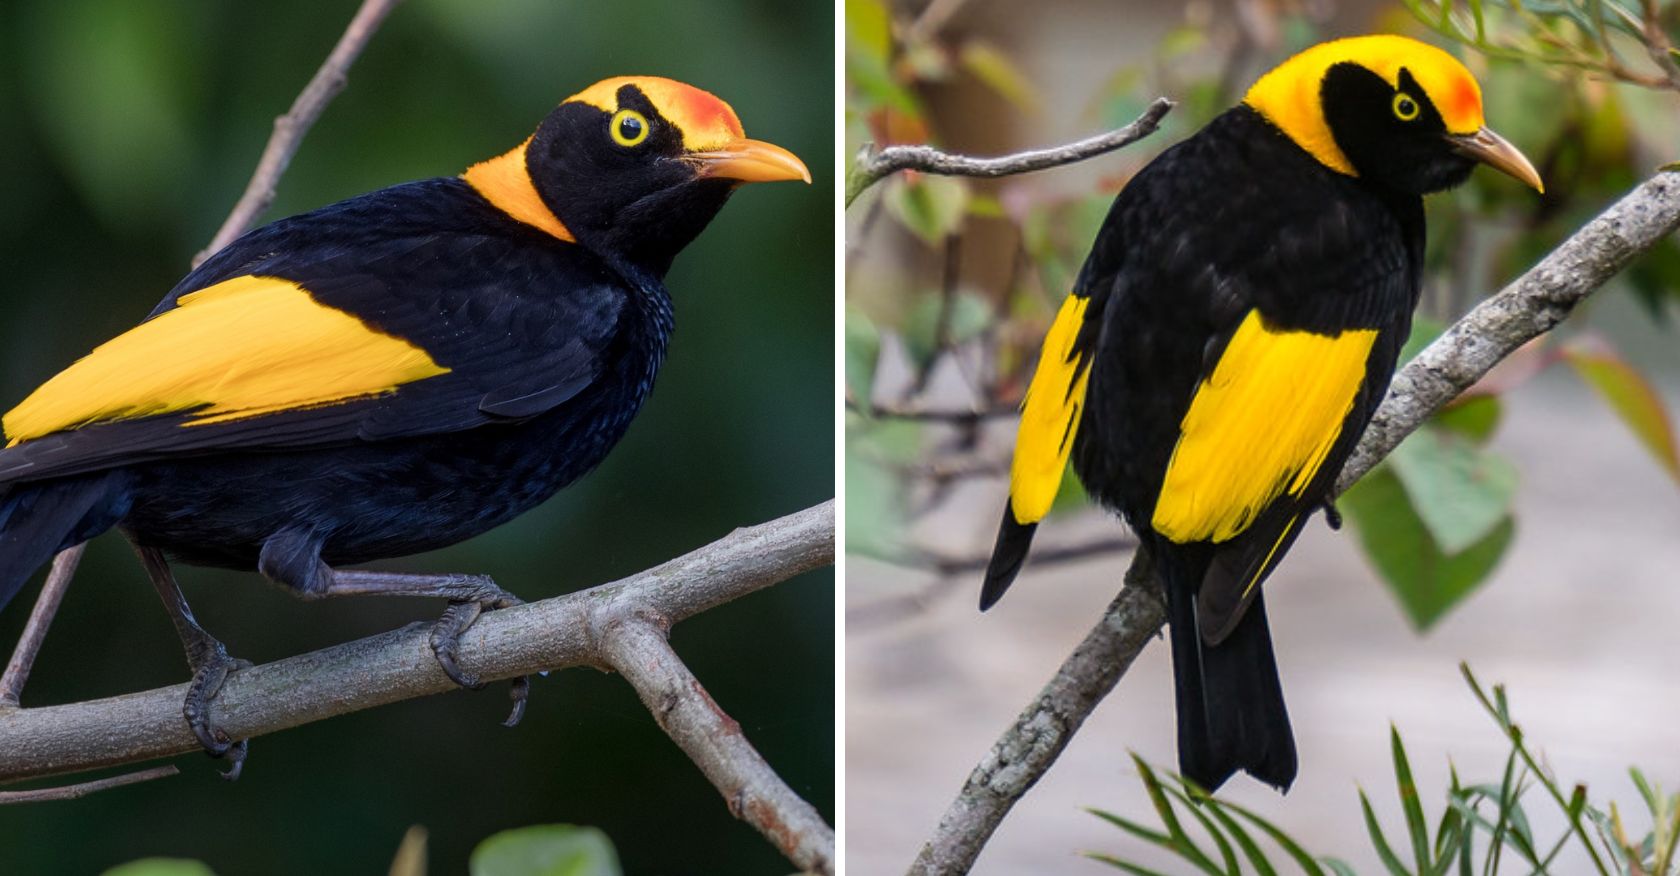 The Regent Bowerbird never fails to mesmerize with its exquisite displays and stunning colors